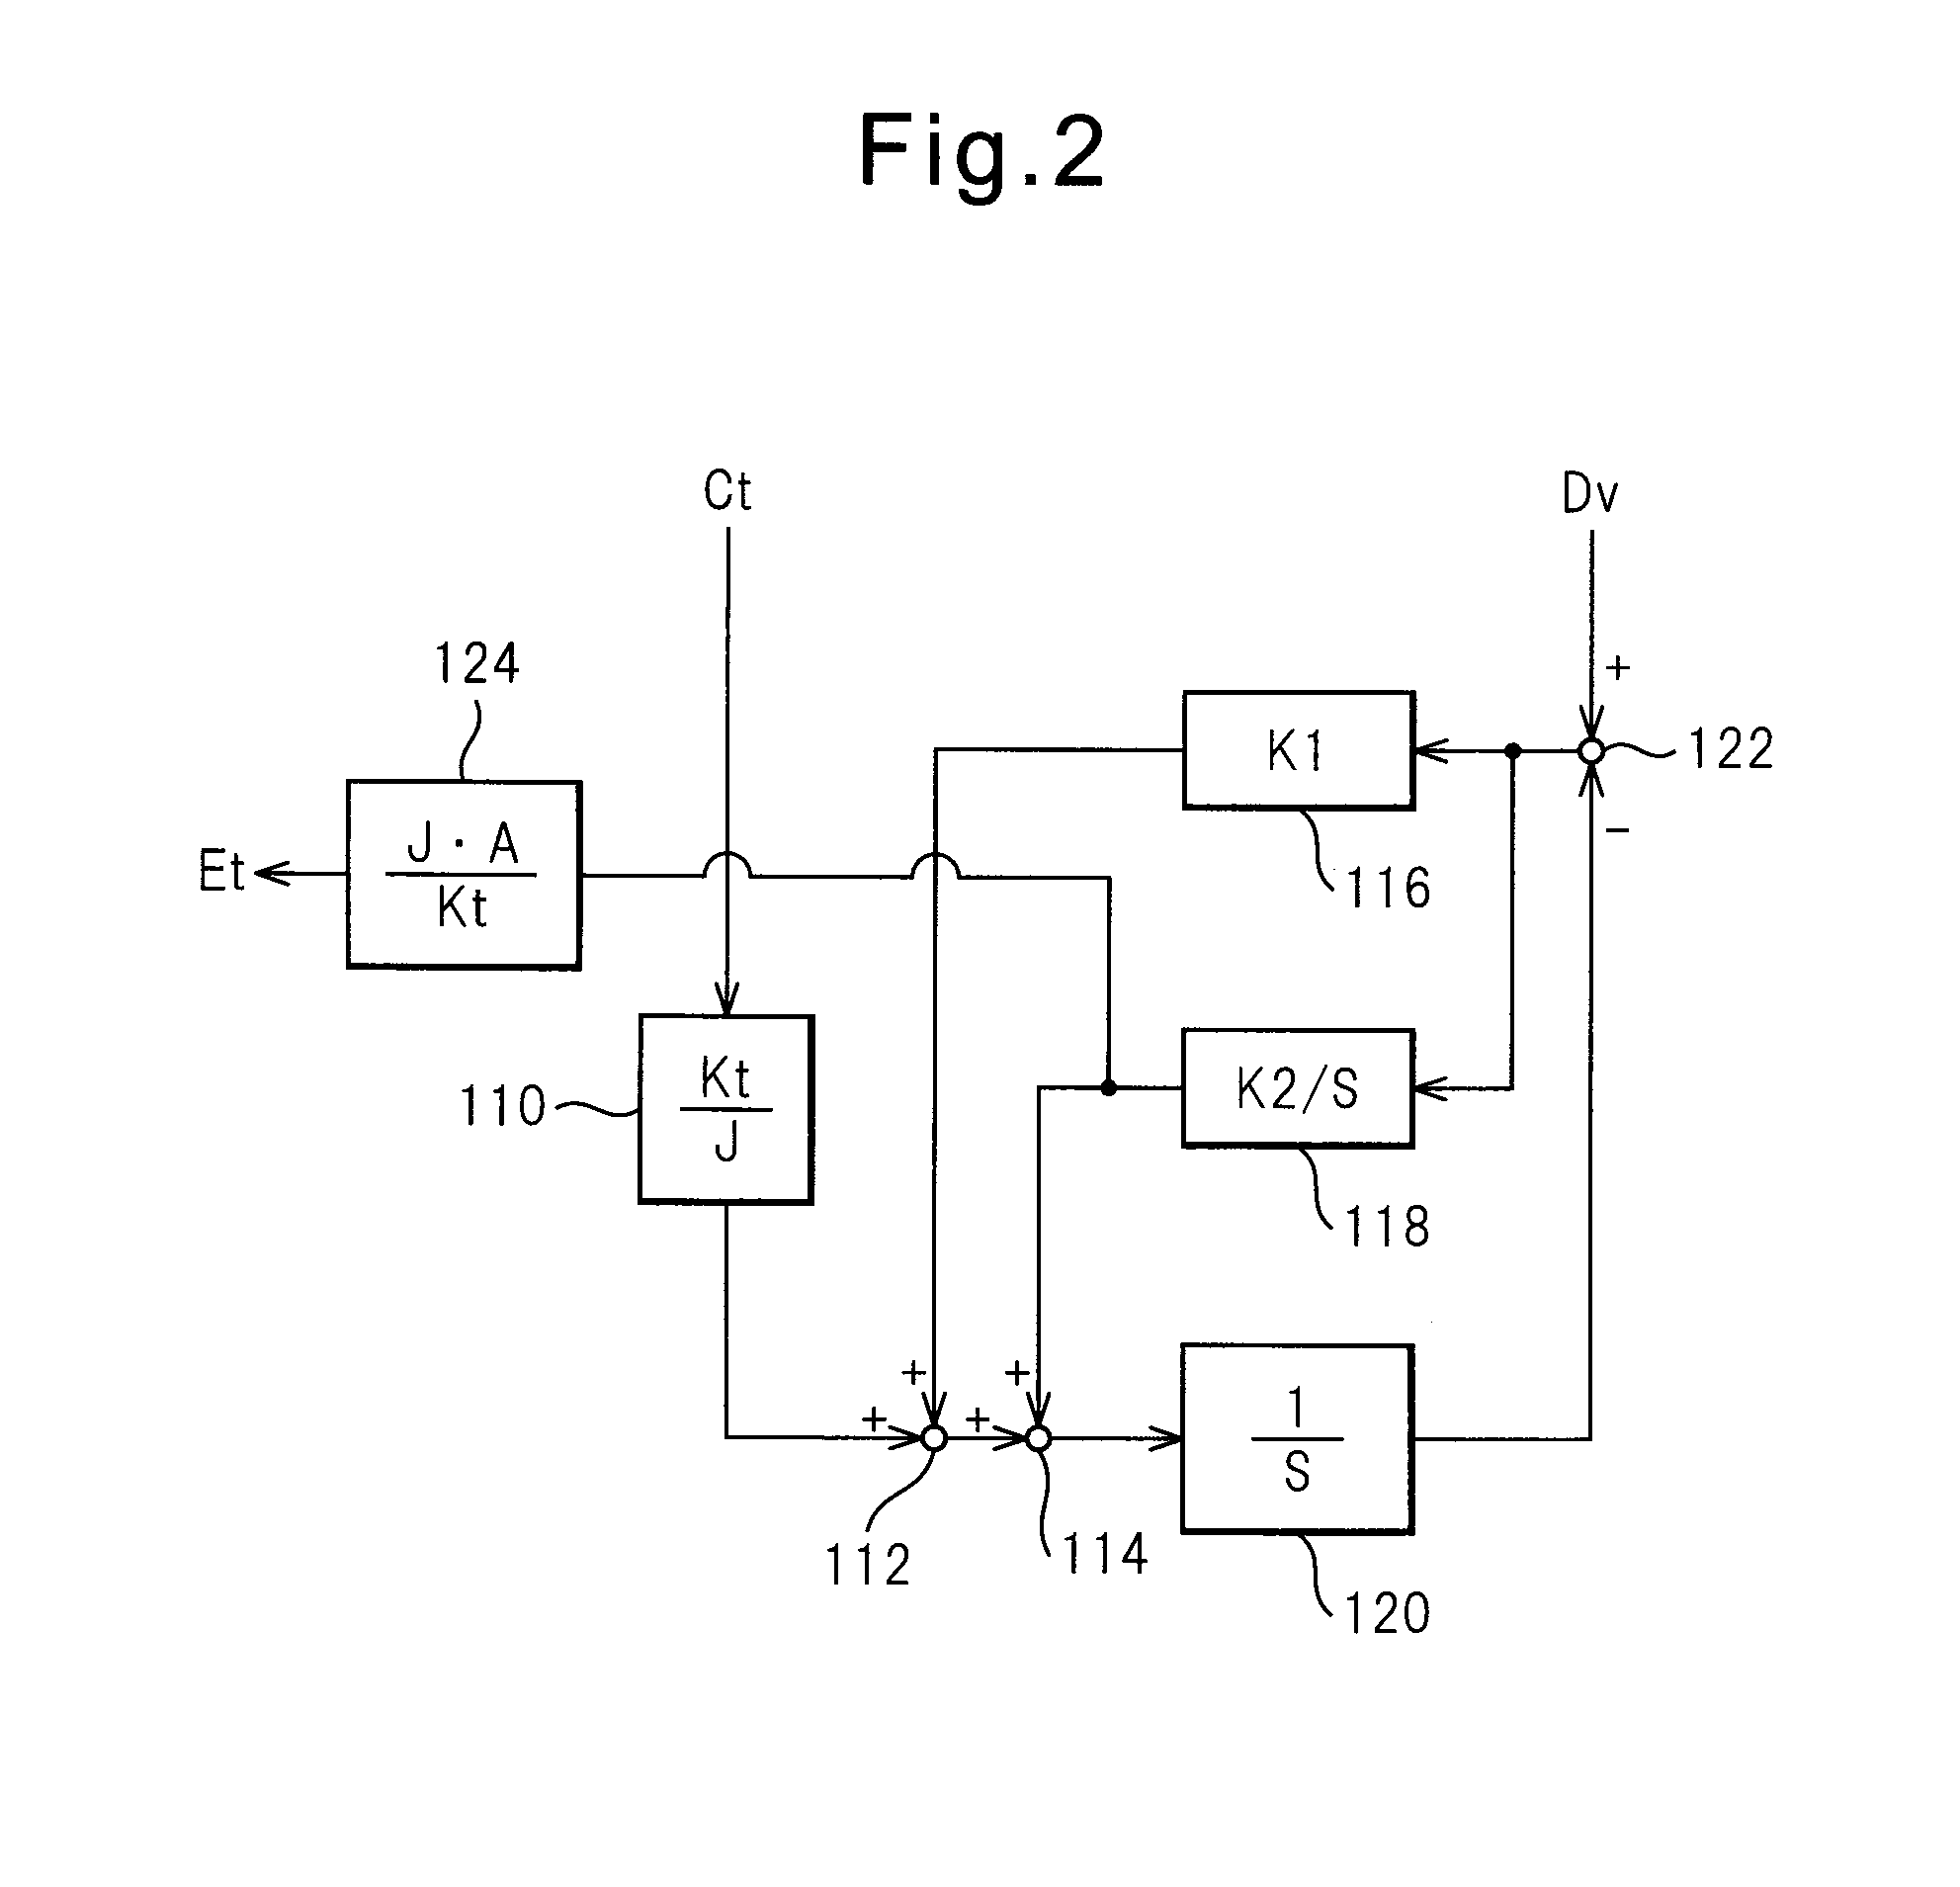 Motor drive device provided with disturbance load torque observer